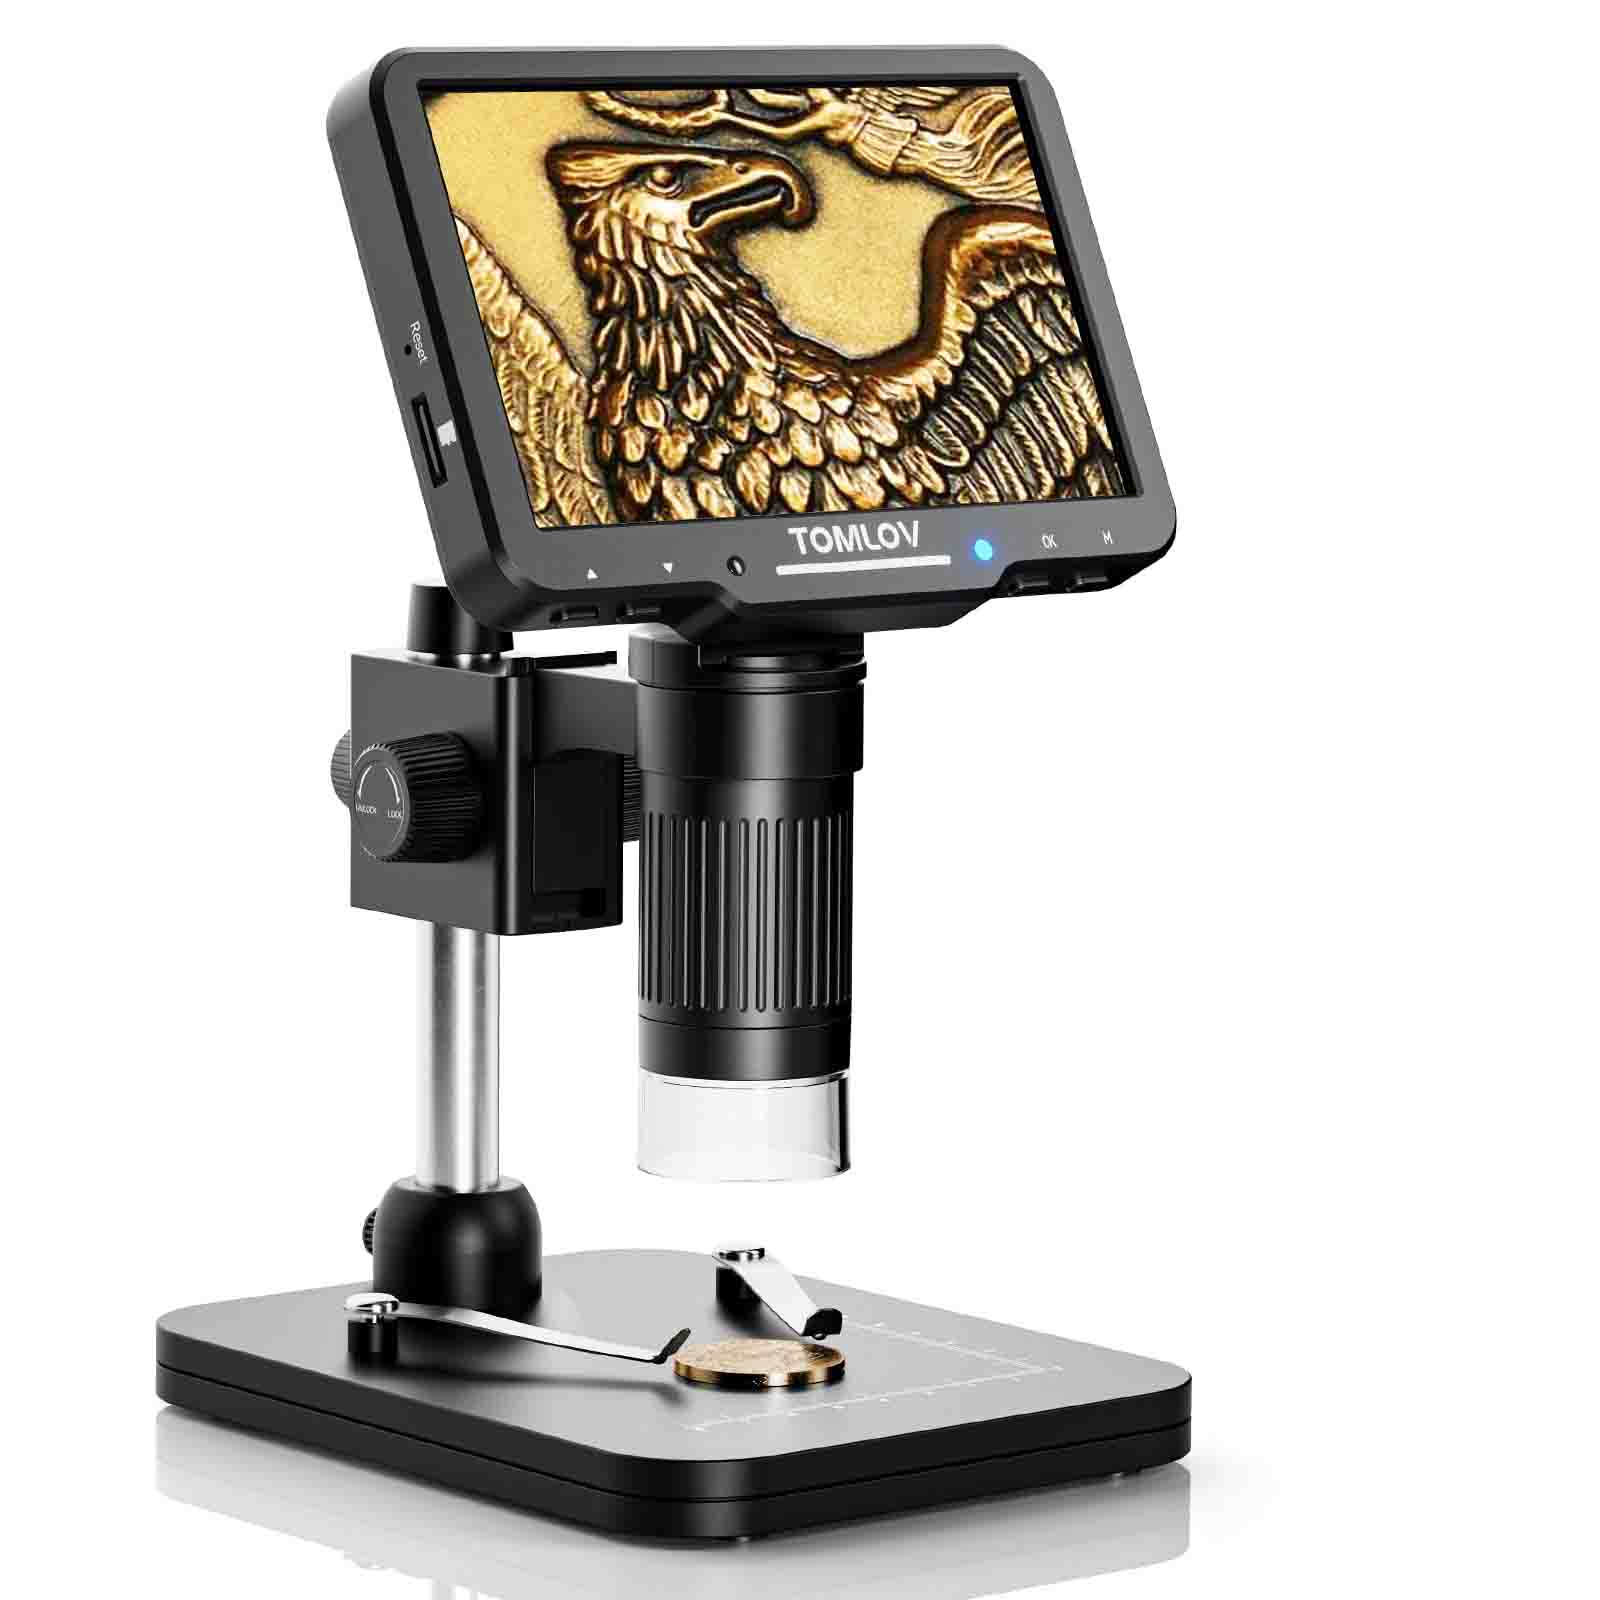 TOMLOV 1000X Error Coin Microscope DM4S +6 inch Extension Tube ET02,LCD  Digital Microscope with 4.3 Screen, Metal Stand, PC View, Photo/Video for  Adults Kids, 32 GB SD Card Included